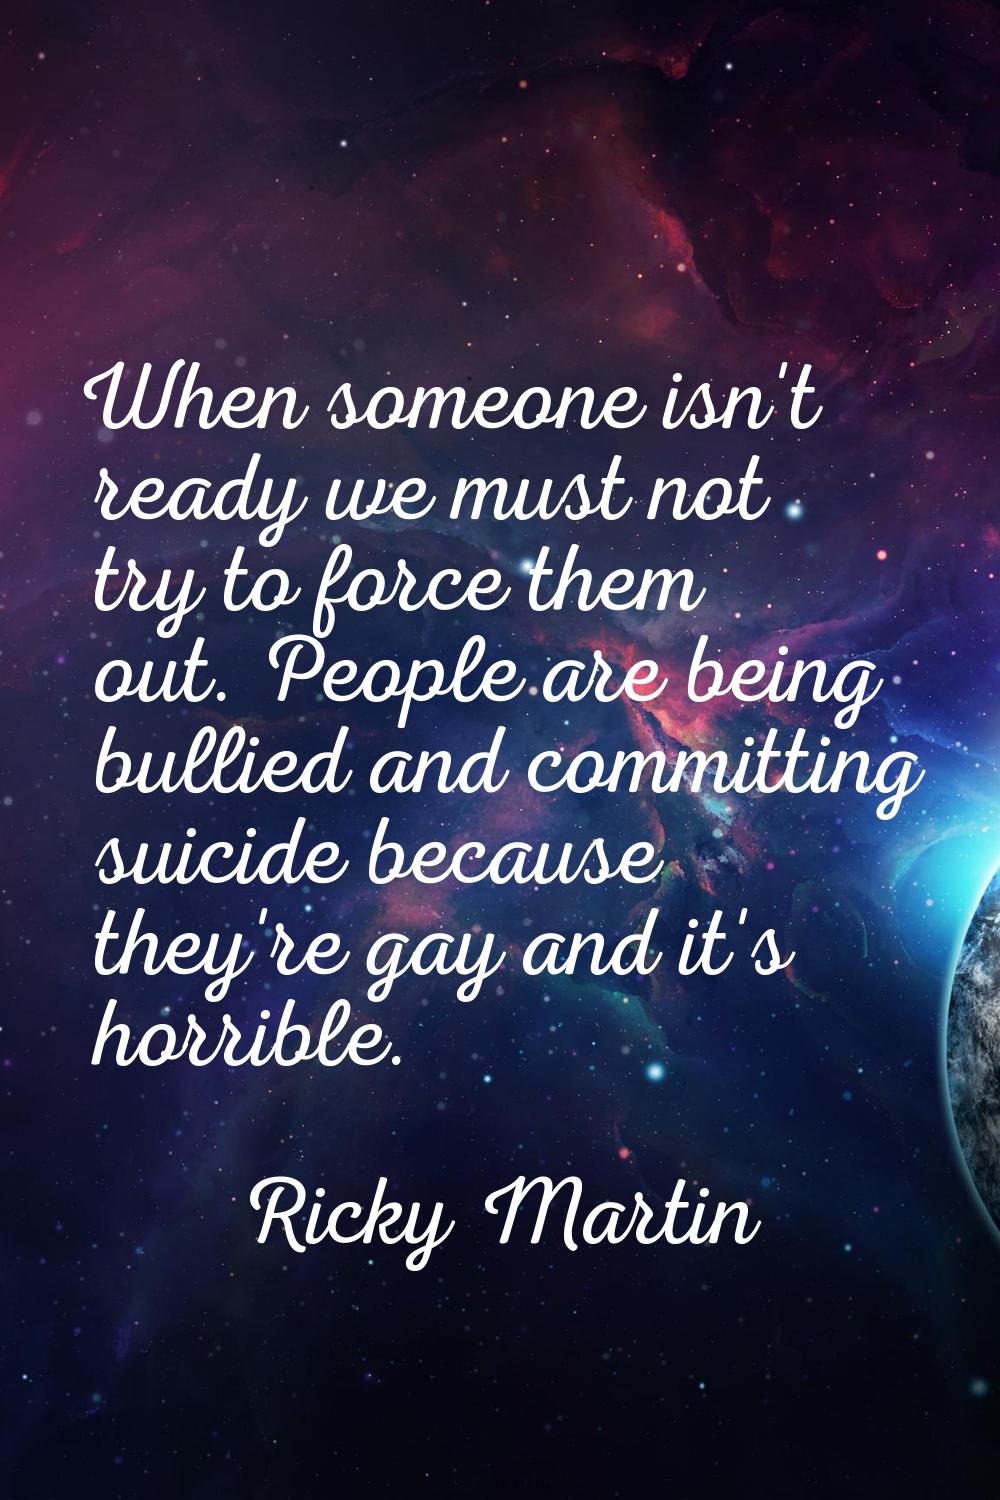 When someone isn't ready we must not try to force them out. People are being bullied and committing